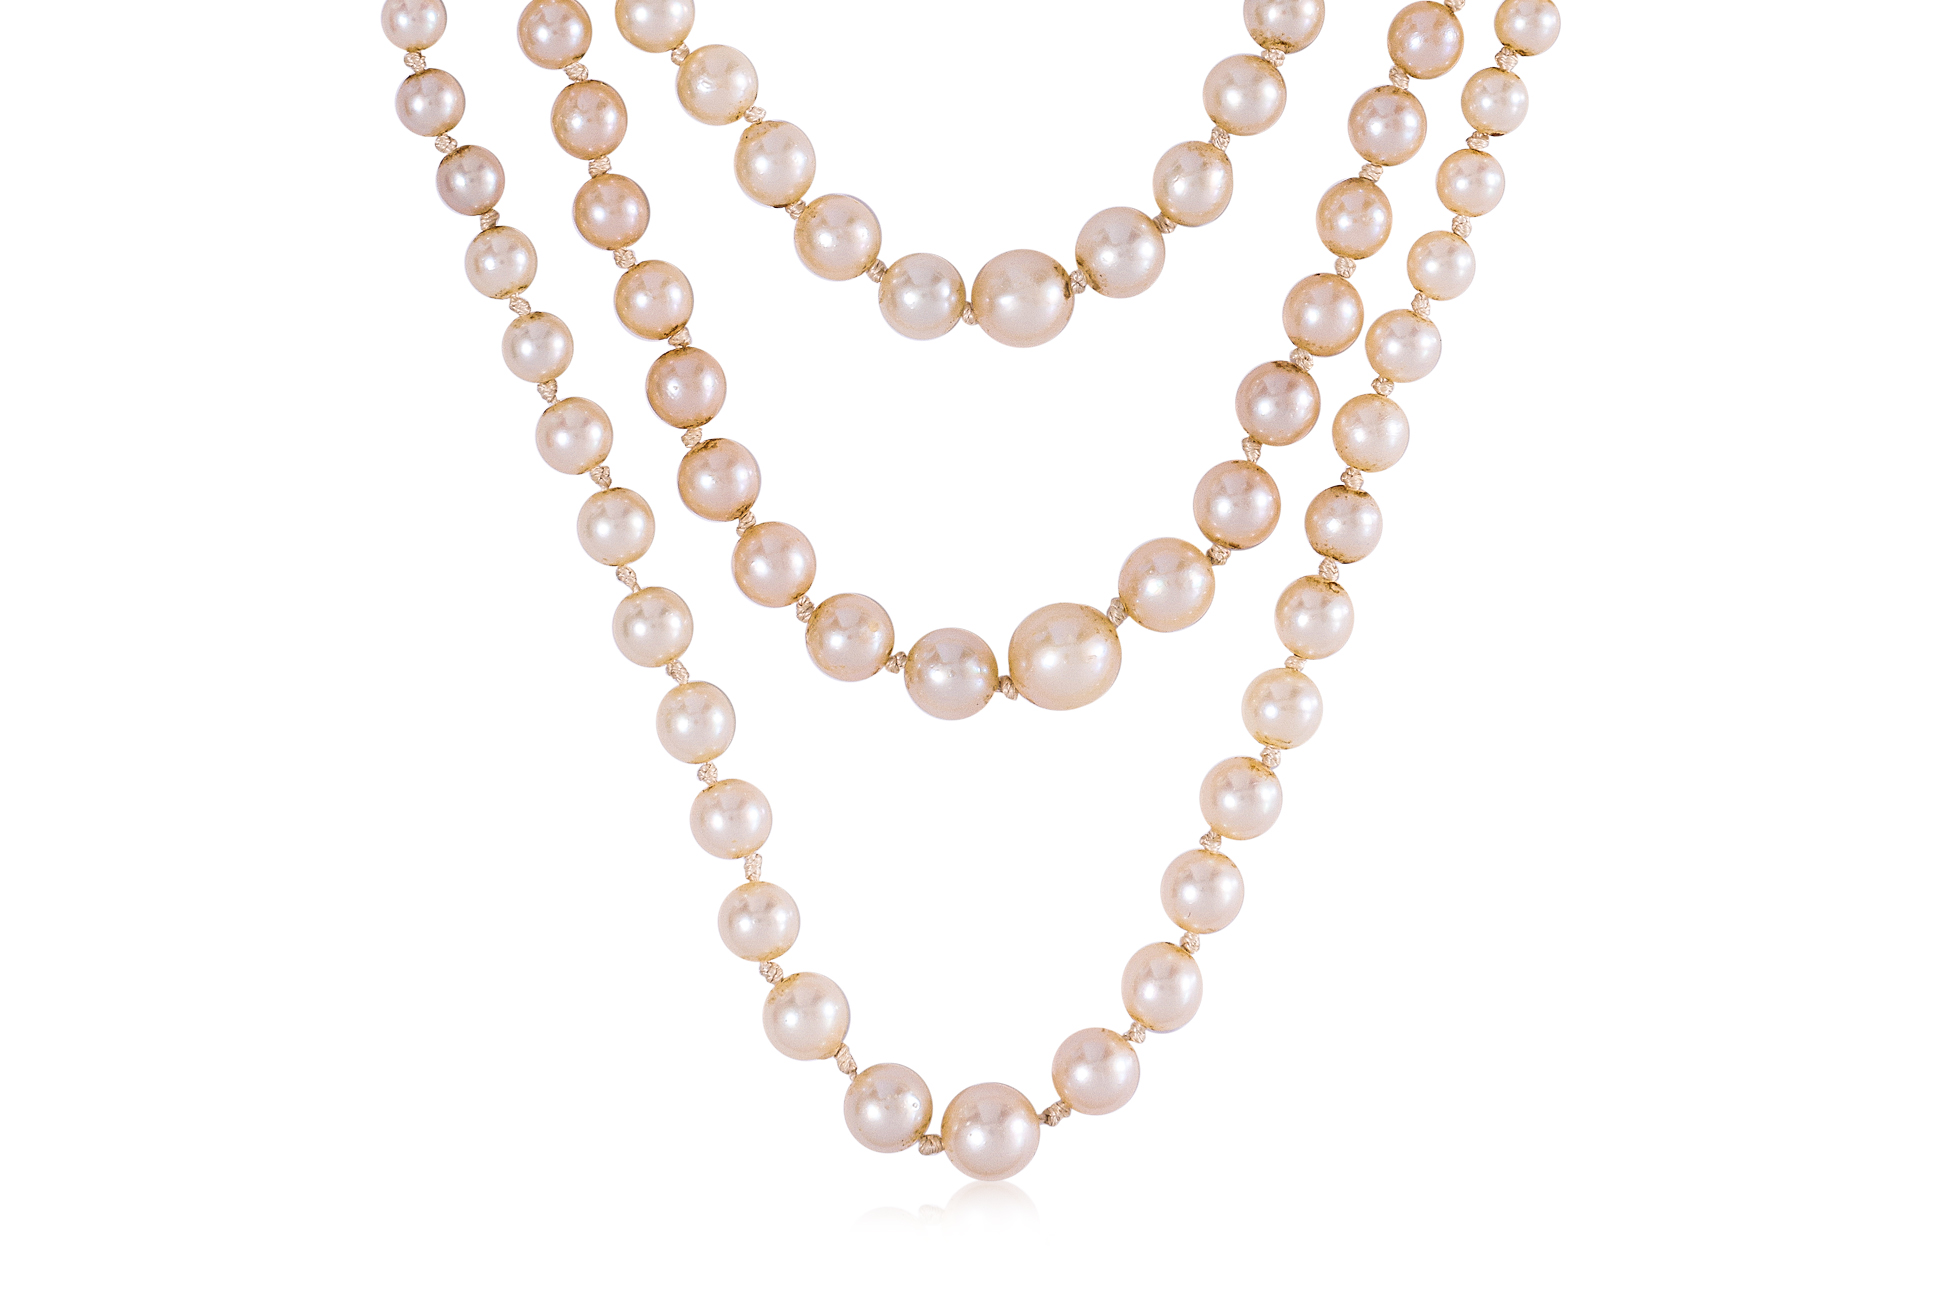 A THREE STRAND AKOYA CULTURED PEARL NECKLACE - Image 3 of 5